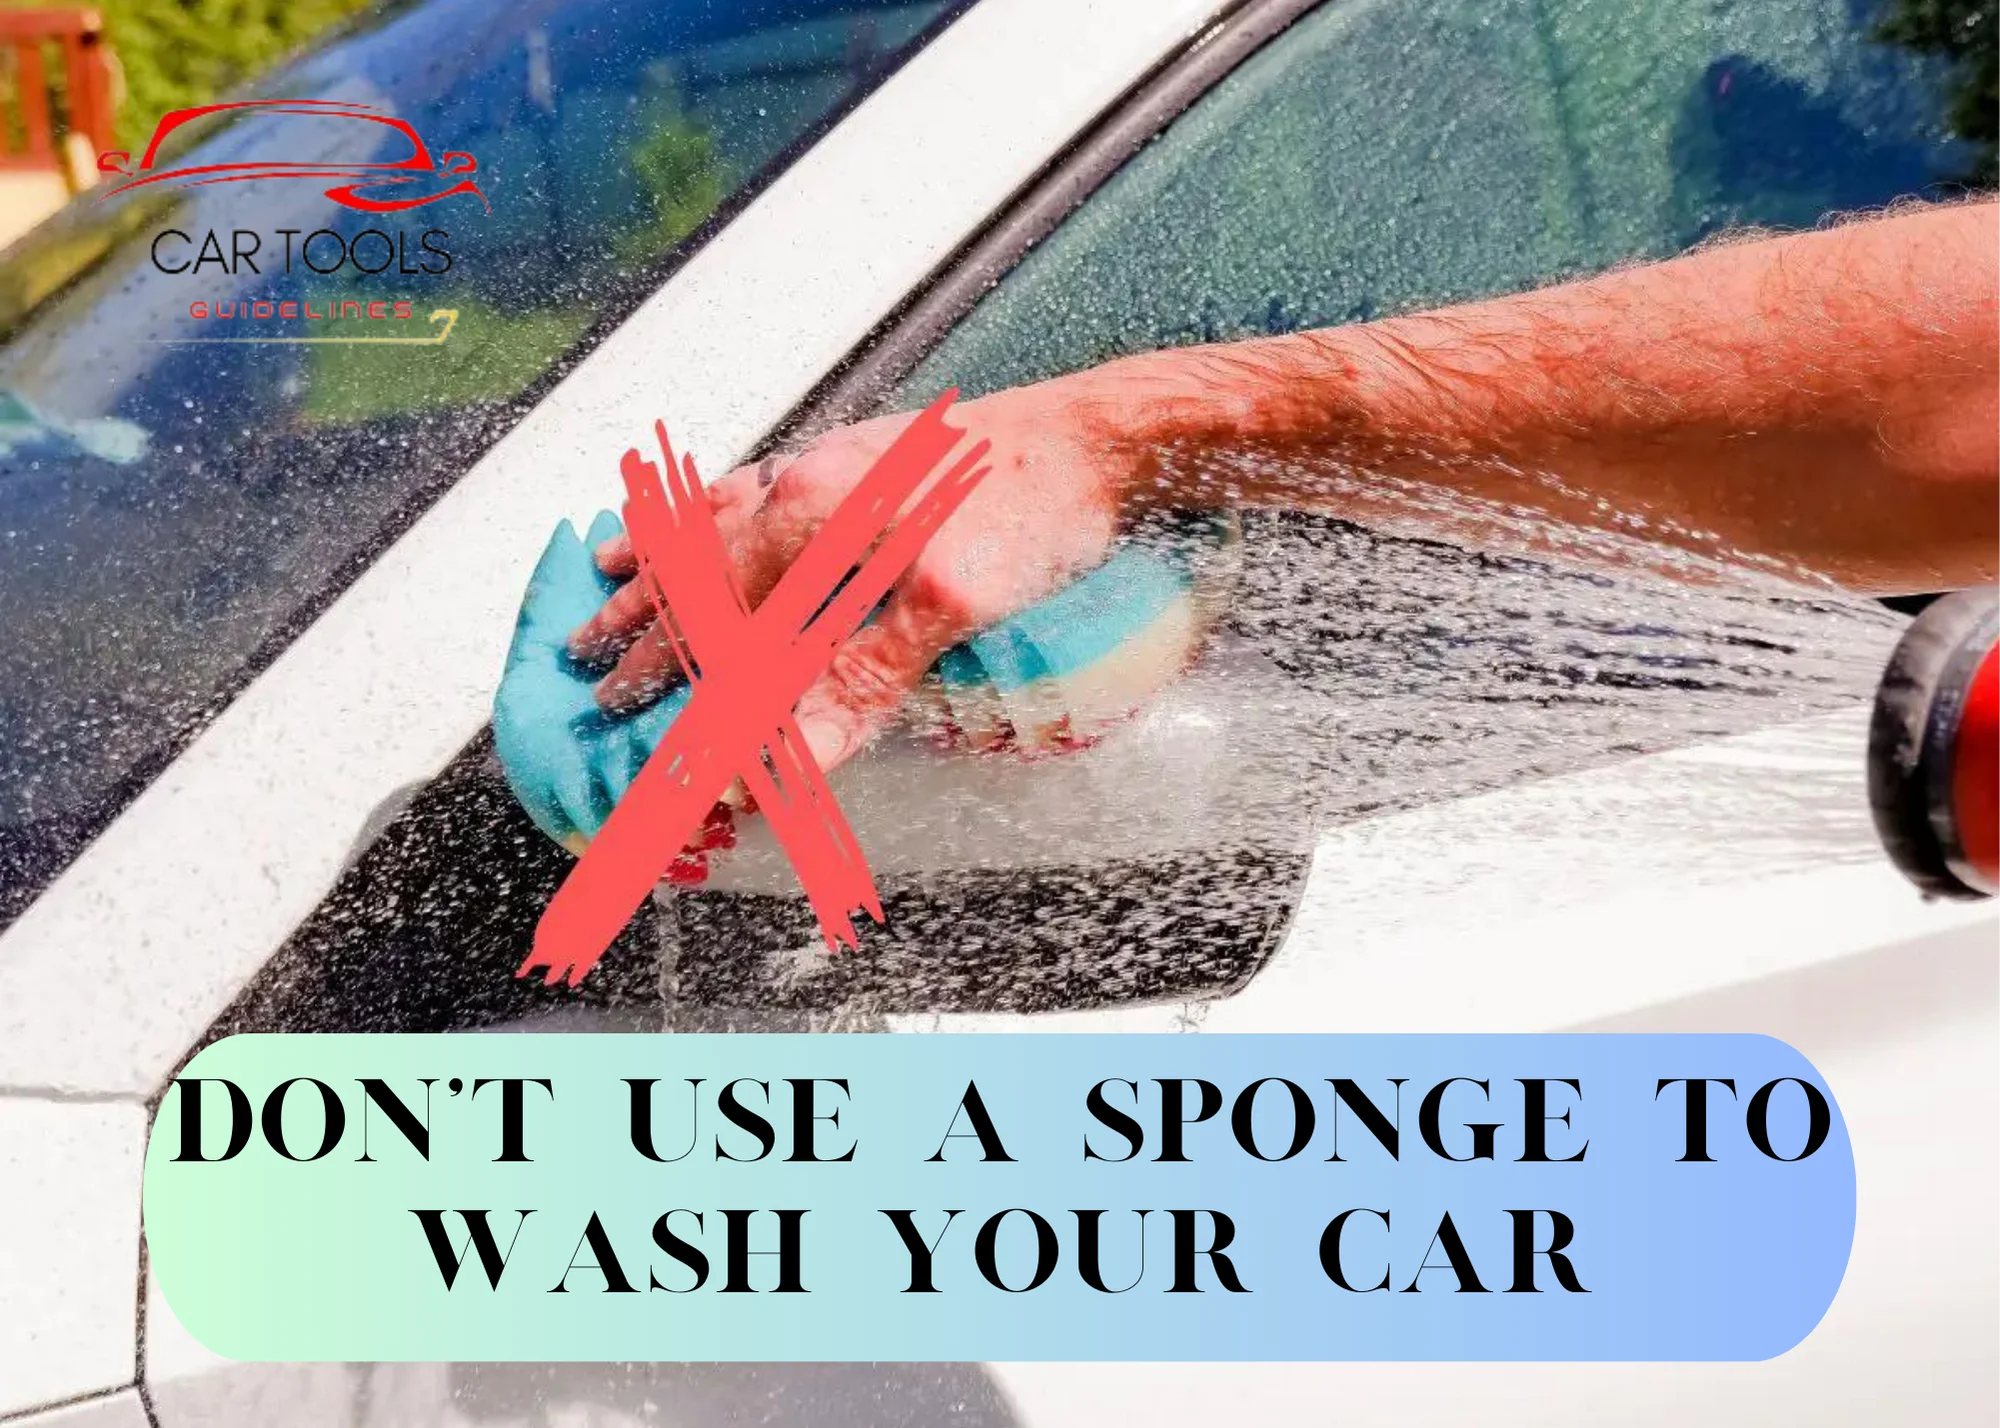 Don’t use a Sponge to wash your car